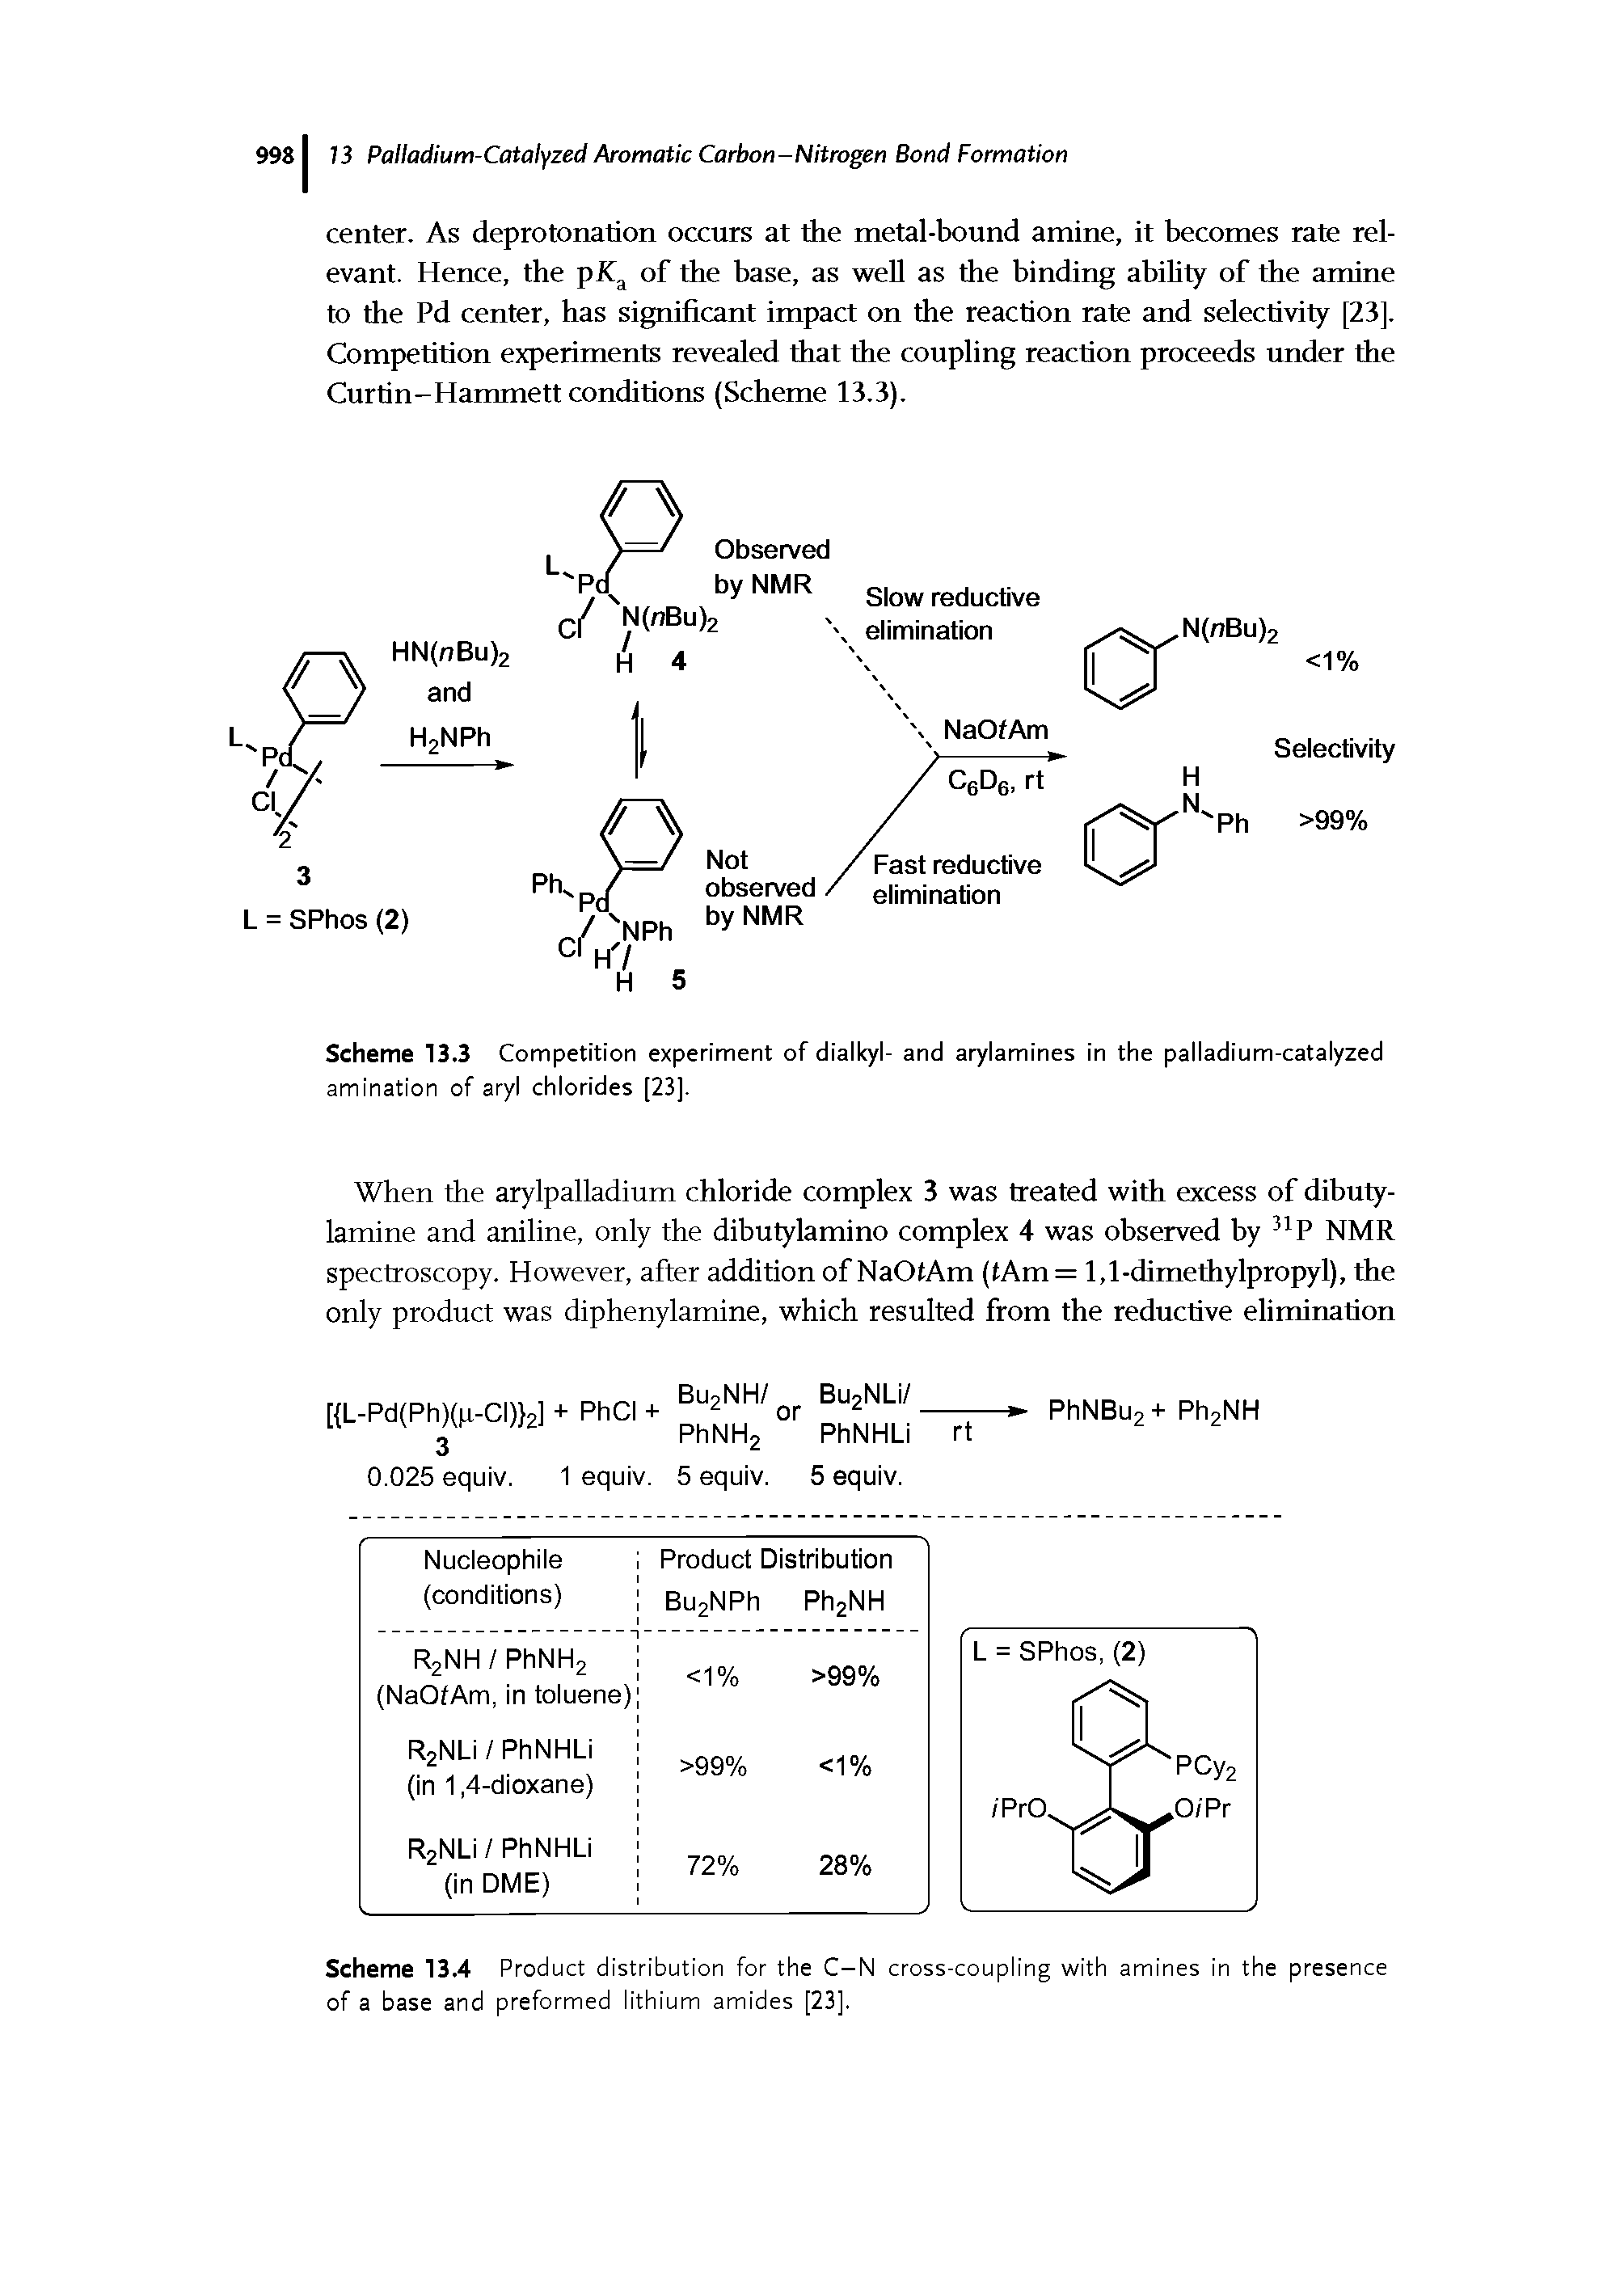 Scheme 13.4 Product distribution for the C-N cross-coupling with amines in the presence of a base and preformed lithium amides [23].